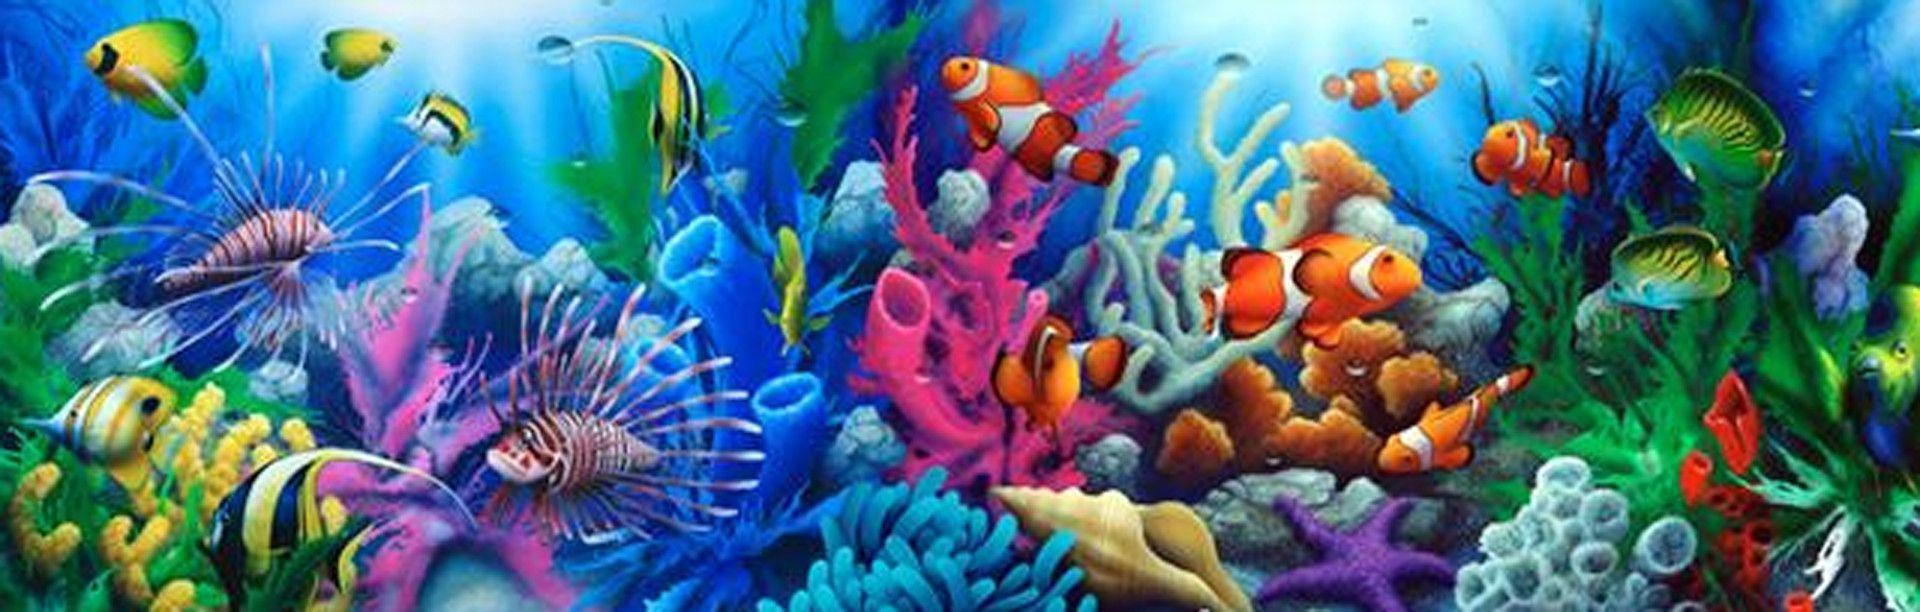 Picture Of Coral Reef